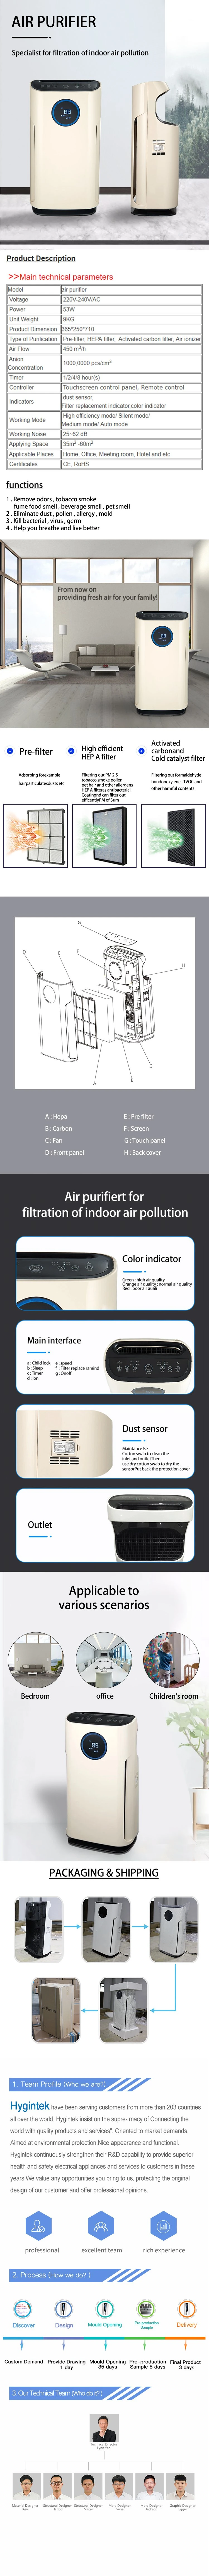 2020 OEM Wholesale Home Pm2.5 WiFi Desktop Anti Virus Air Purifier Korea for Room Ionizer Portable Air Cleaner with HEPA Filter